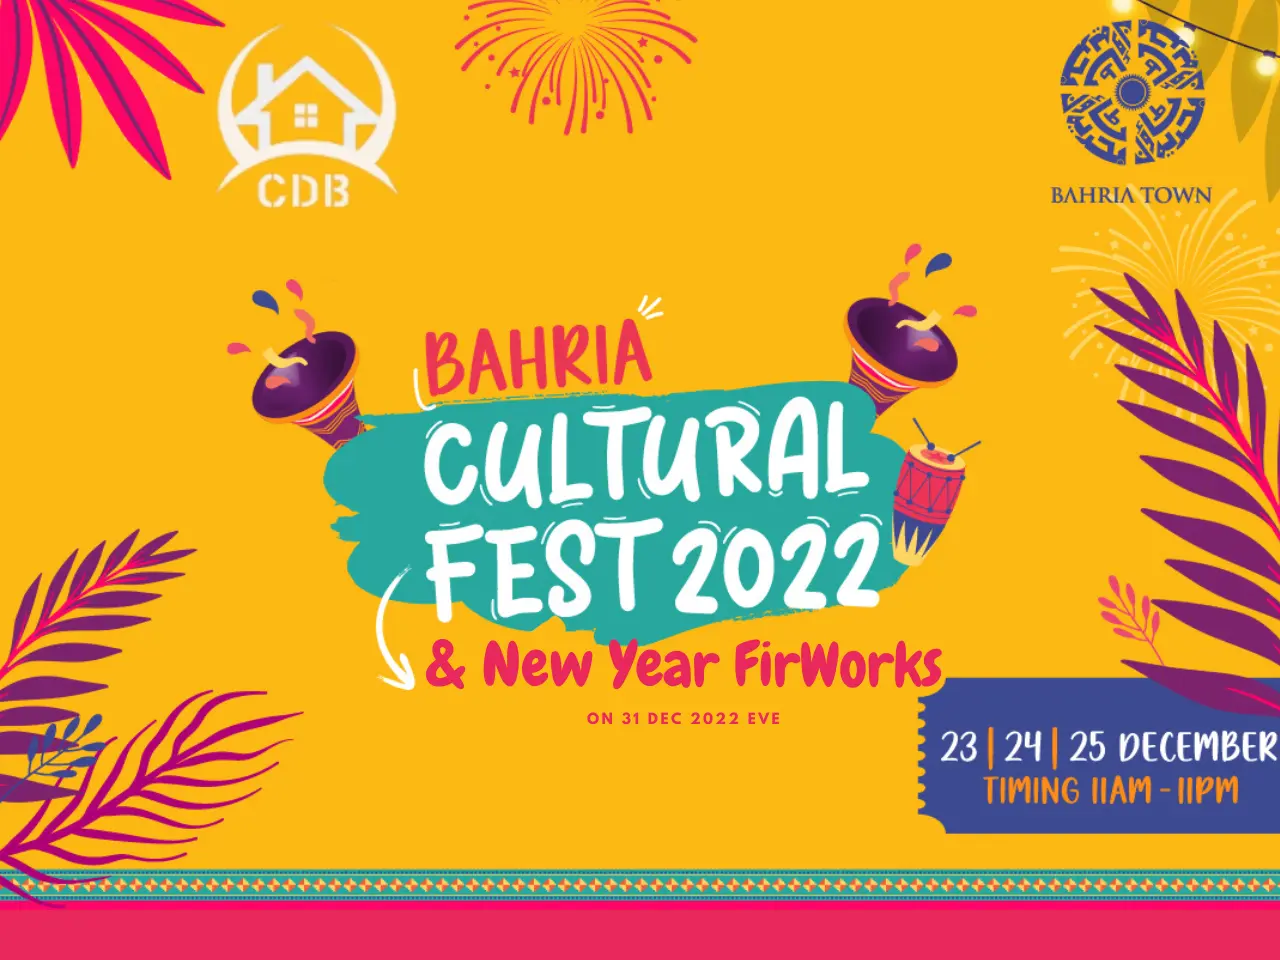 Bahria Town Presents the Bahria Cultural Festival 2022 & New Year Fireworks